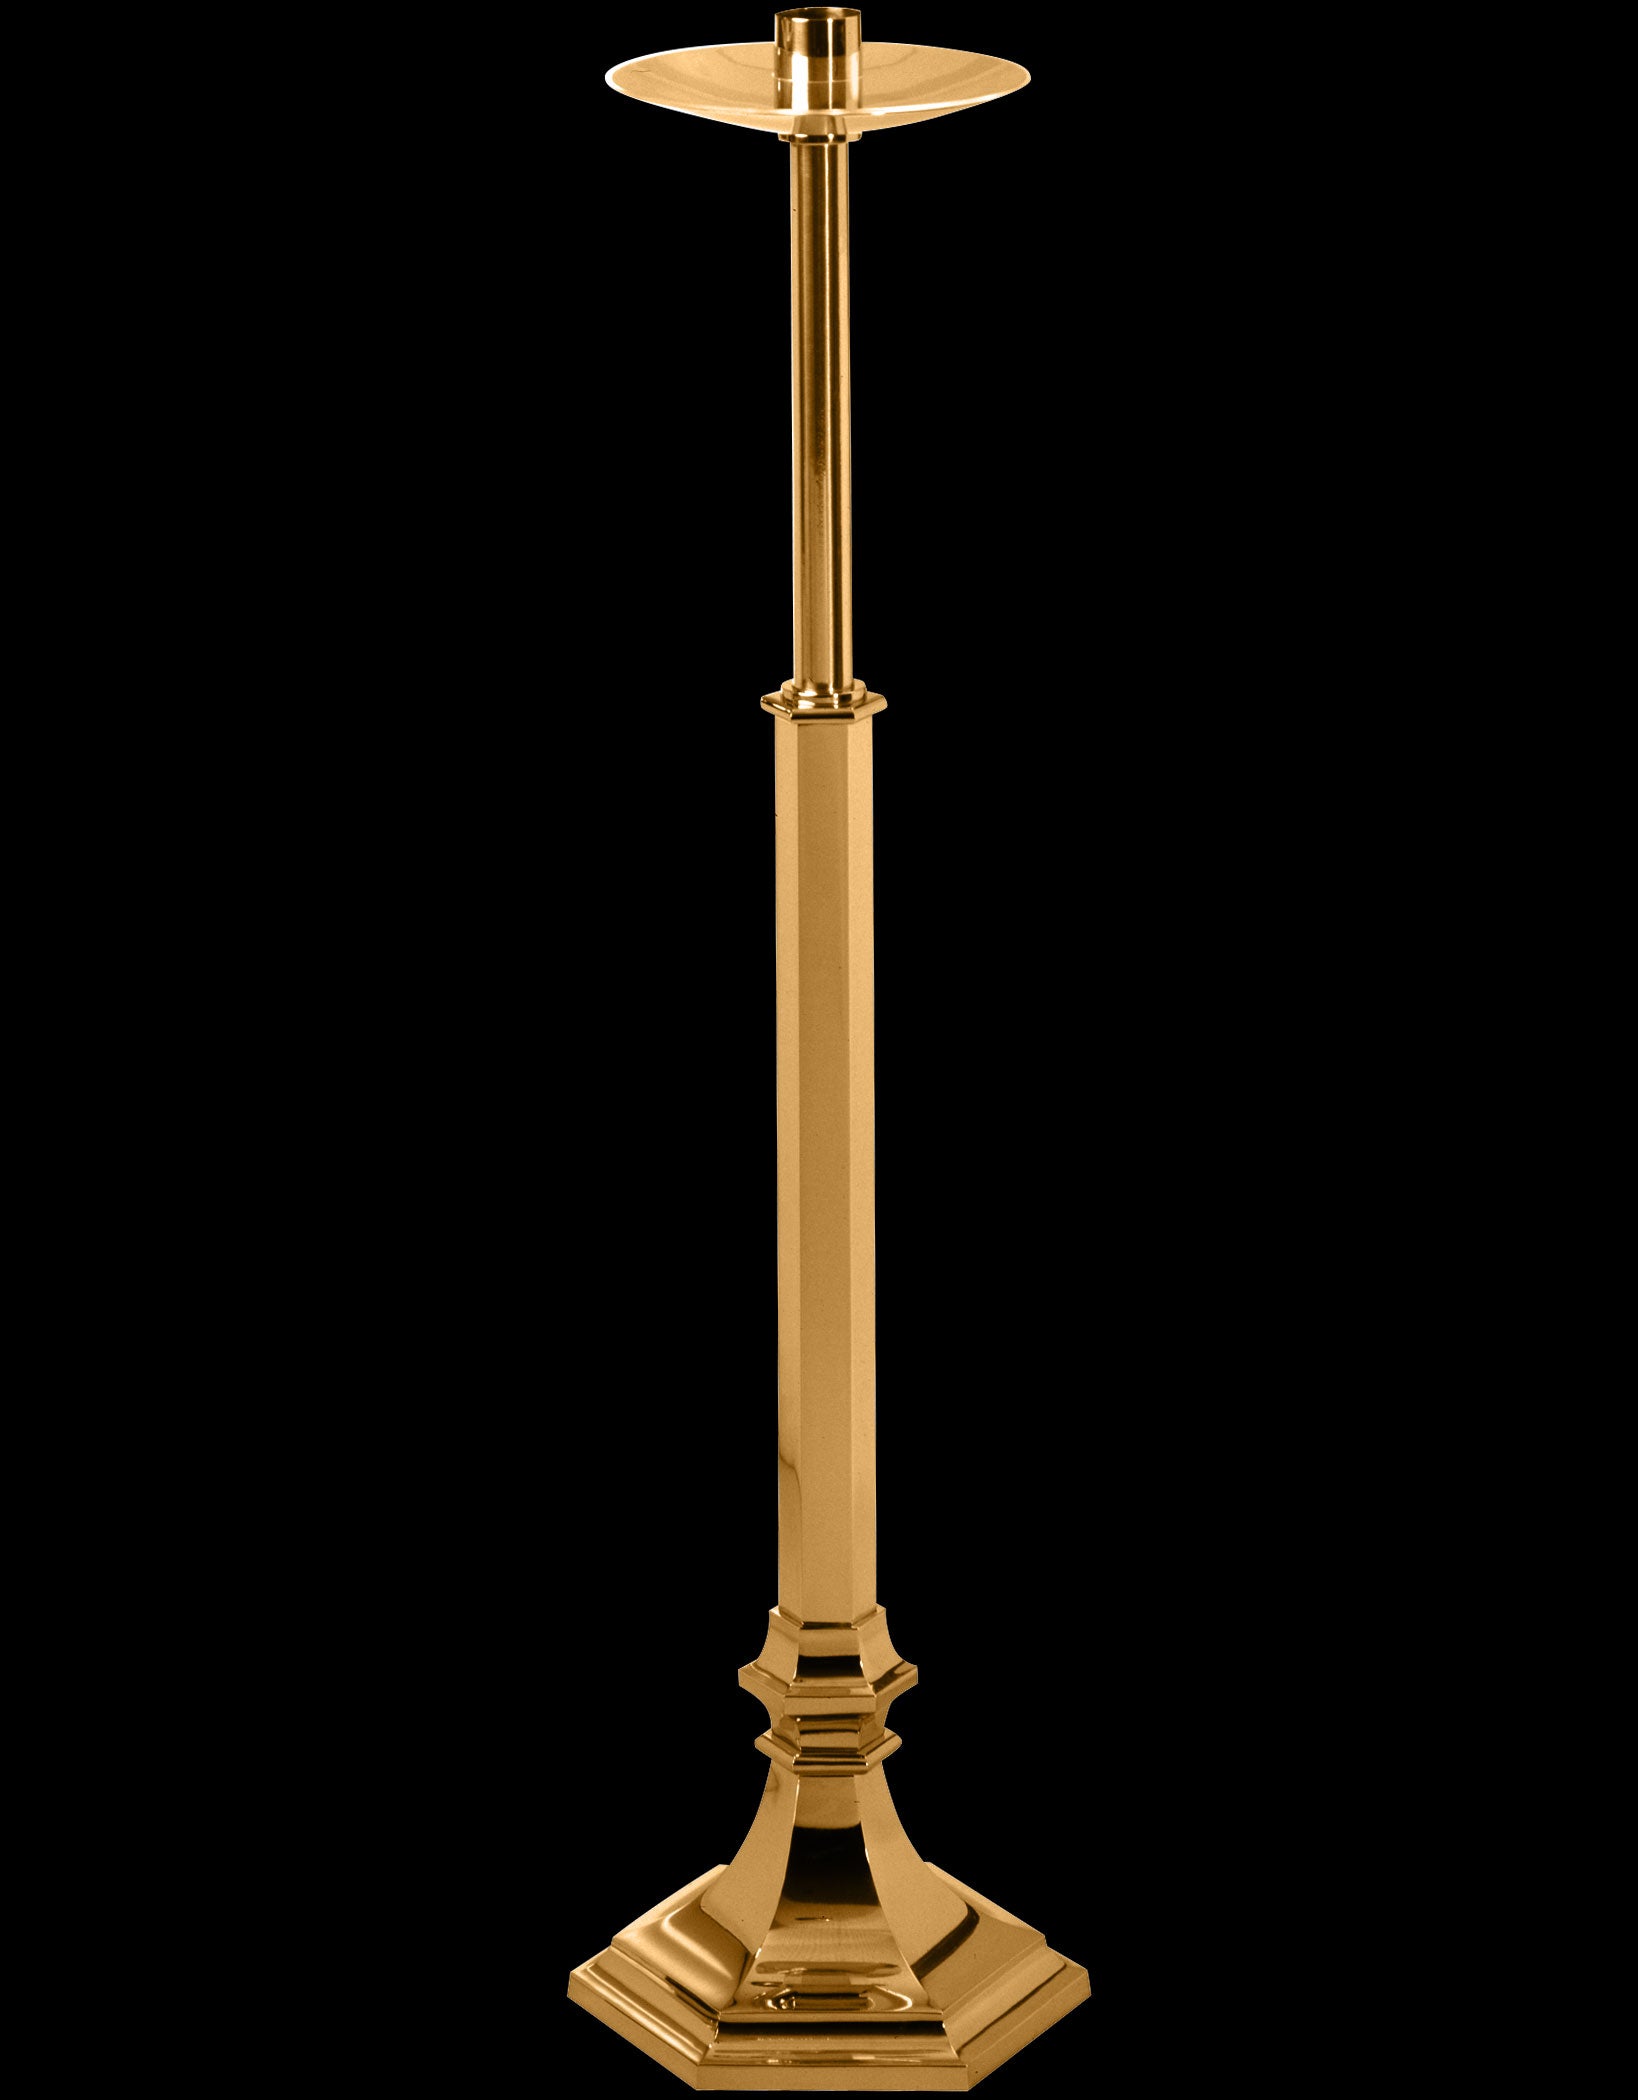 processional-torch-candlestick-245-206.jpg